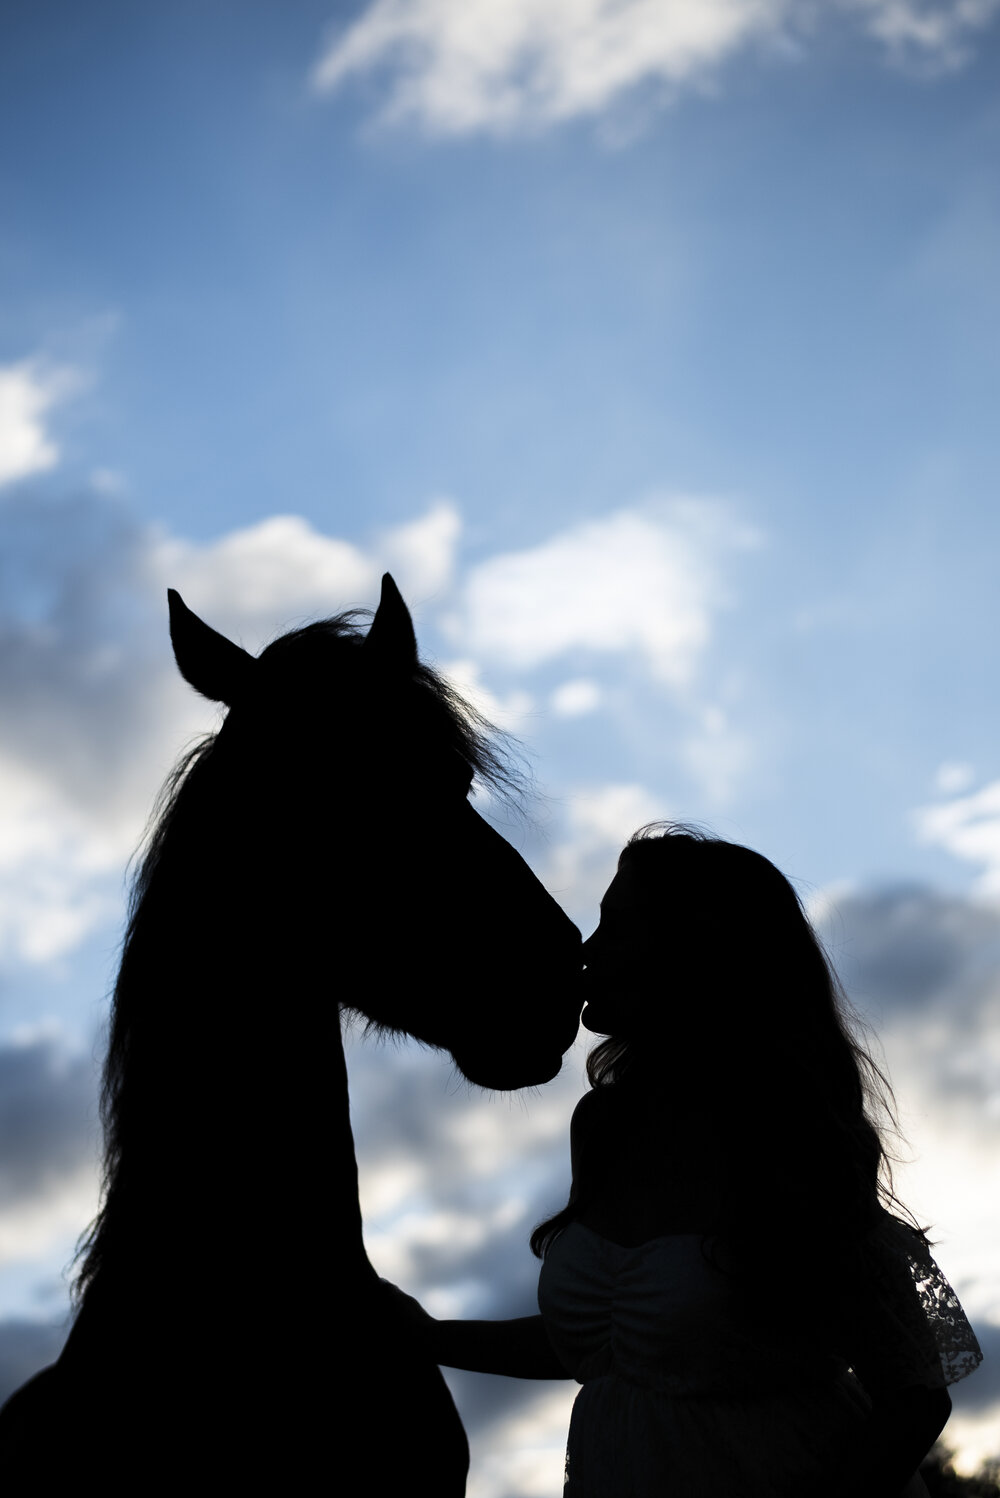 Equine fine art photography of a girl kissing her horse at dusk.